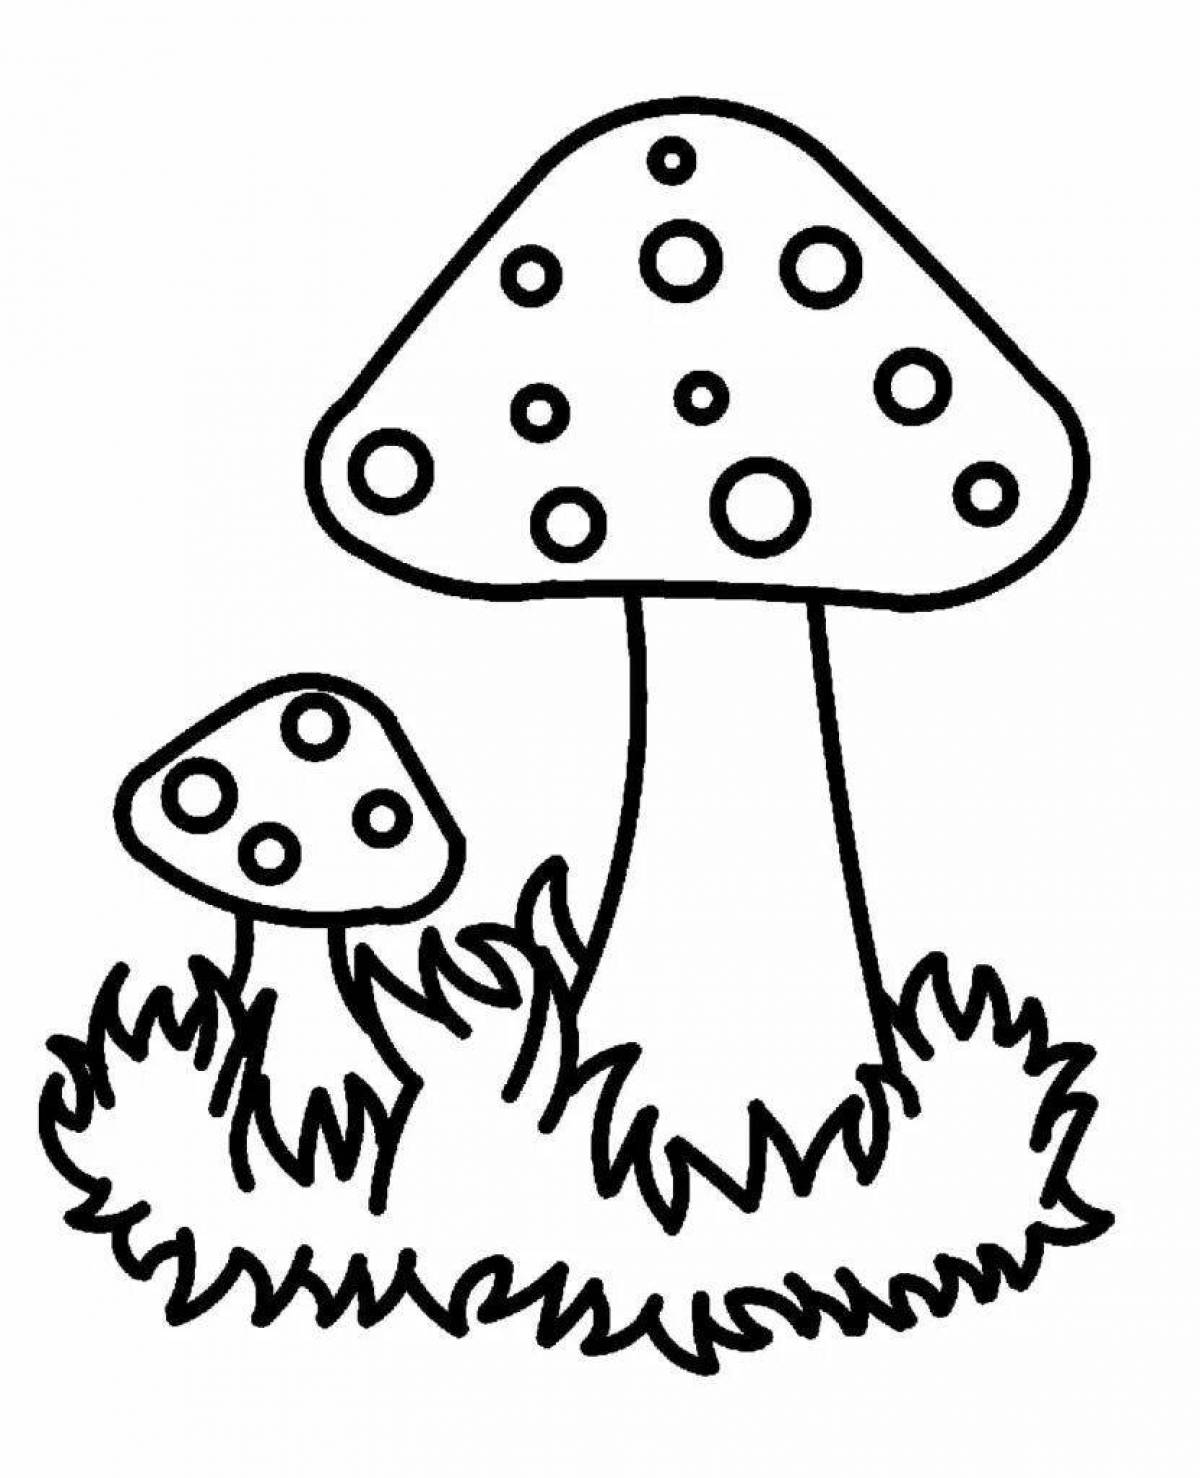 Exquisite fly agaric pattern for students